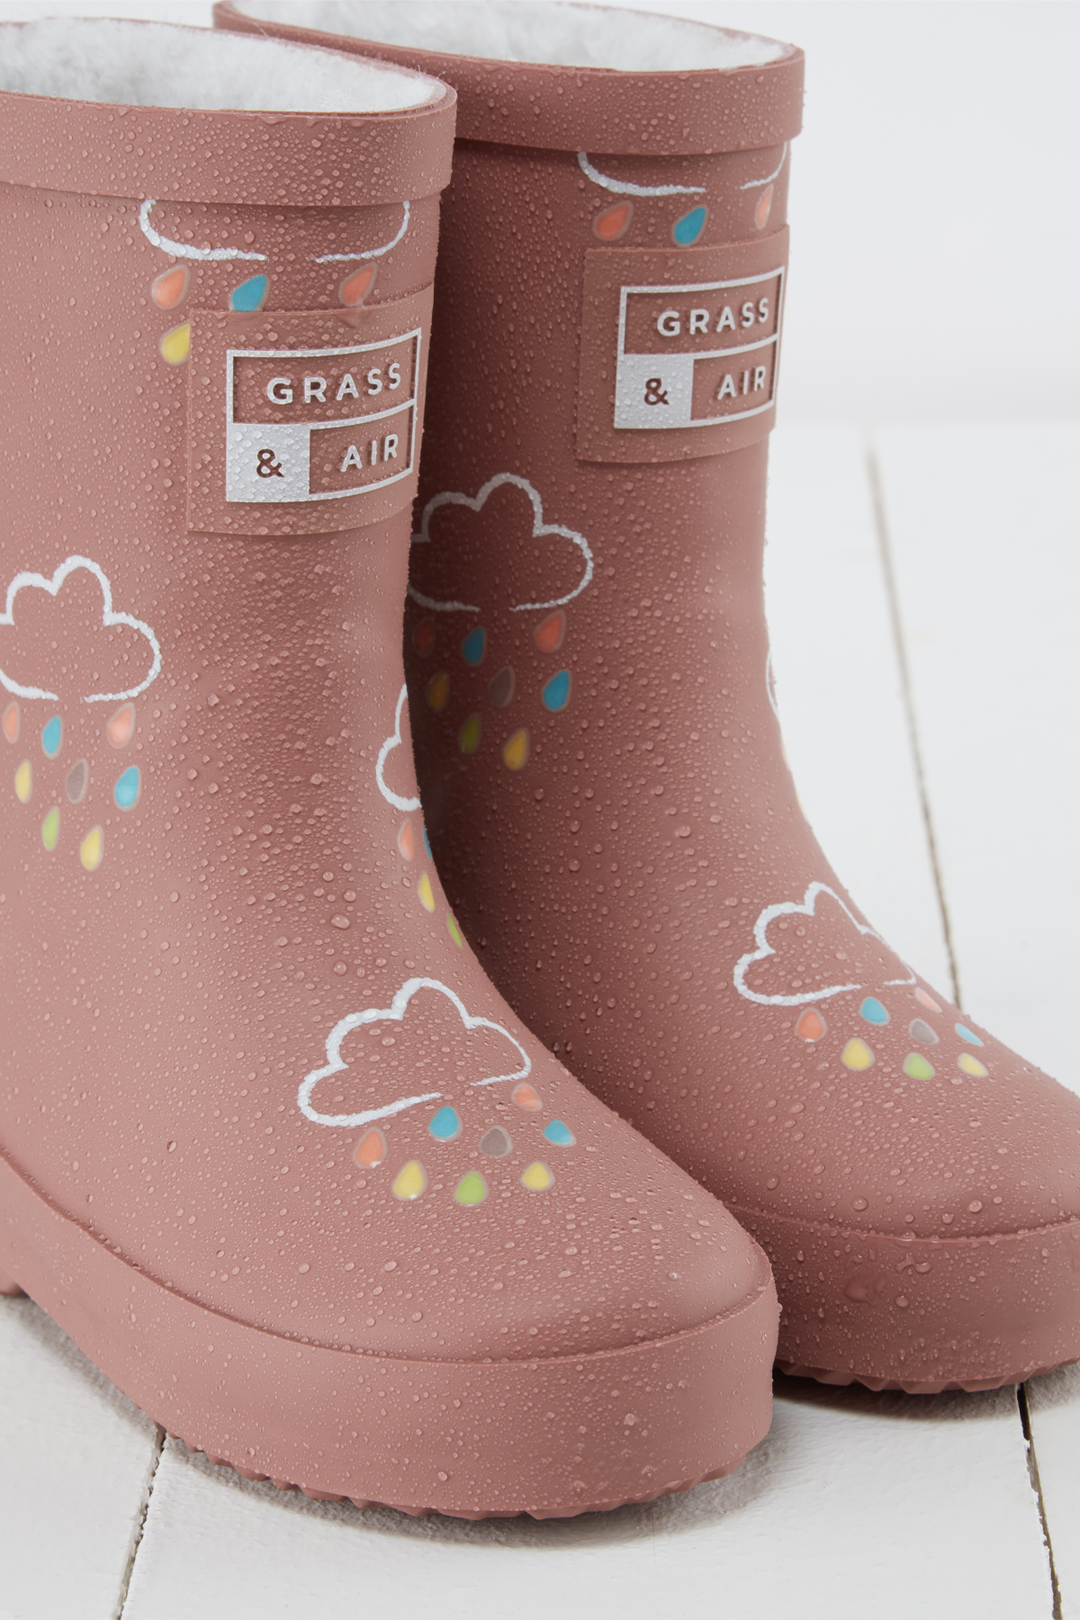 Grass & Air - Colour-Changing Cloud Wellies - Rose